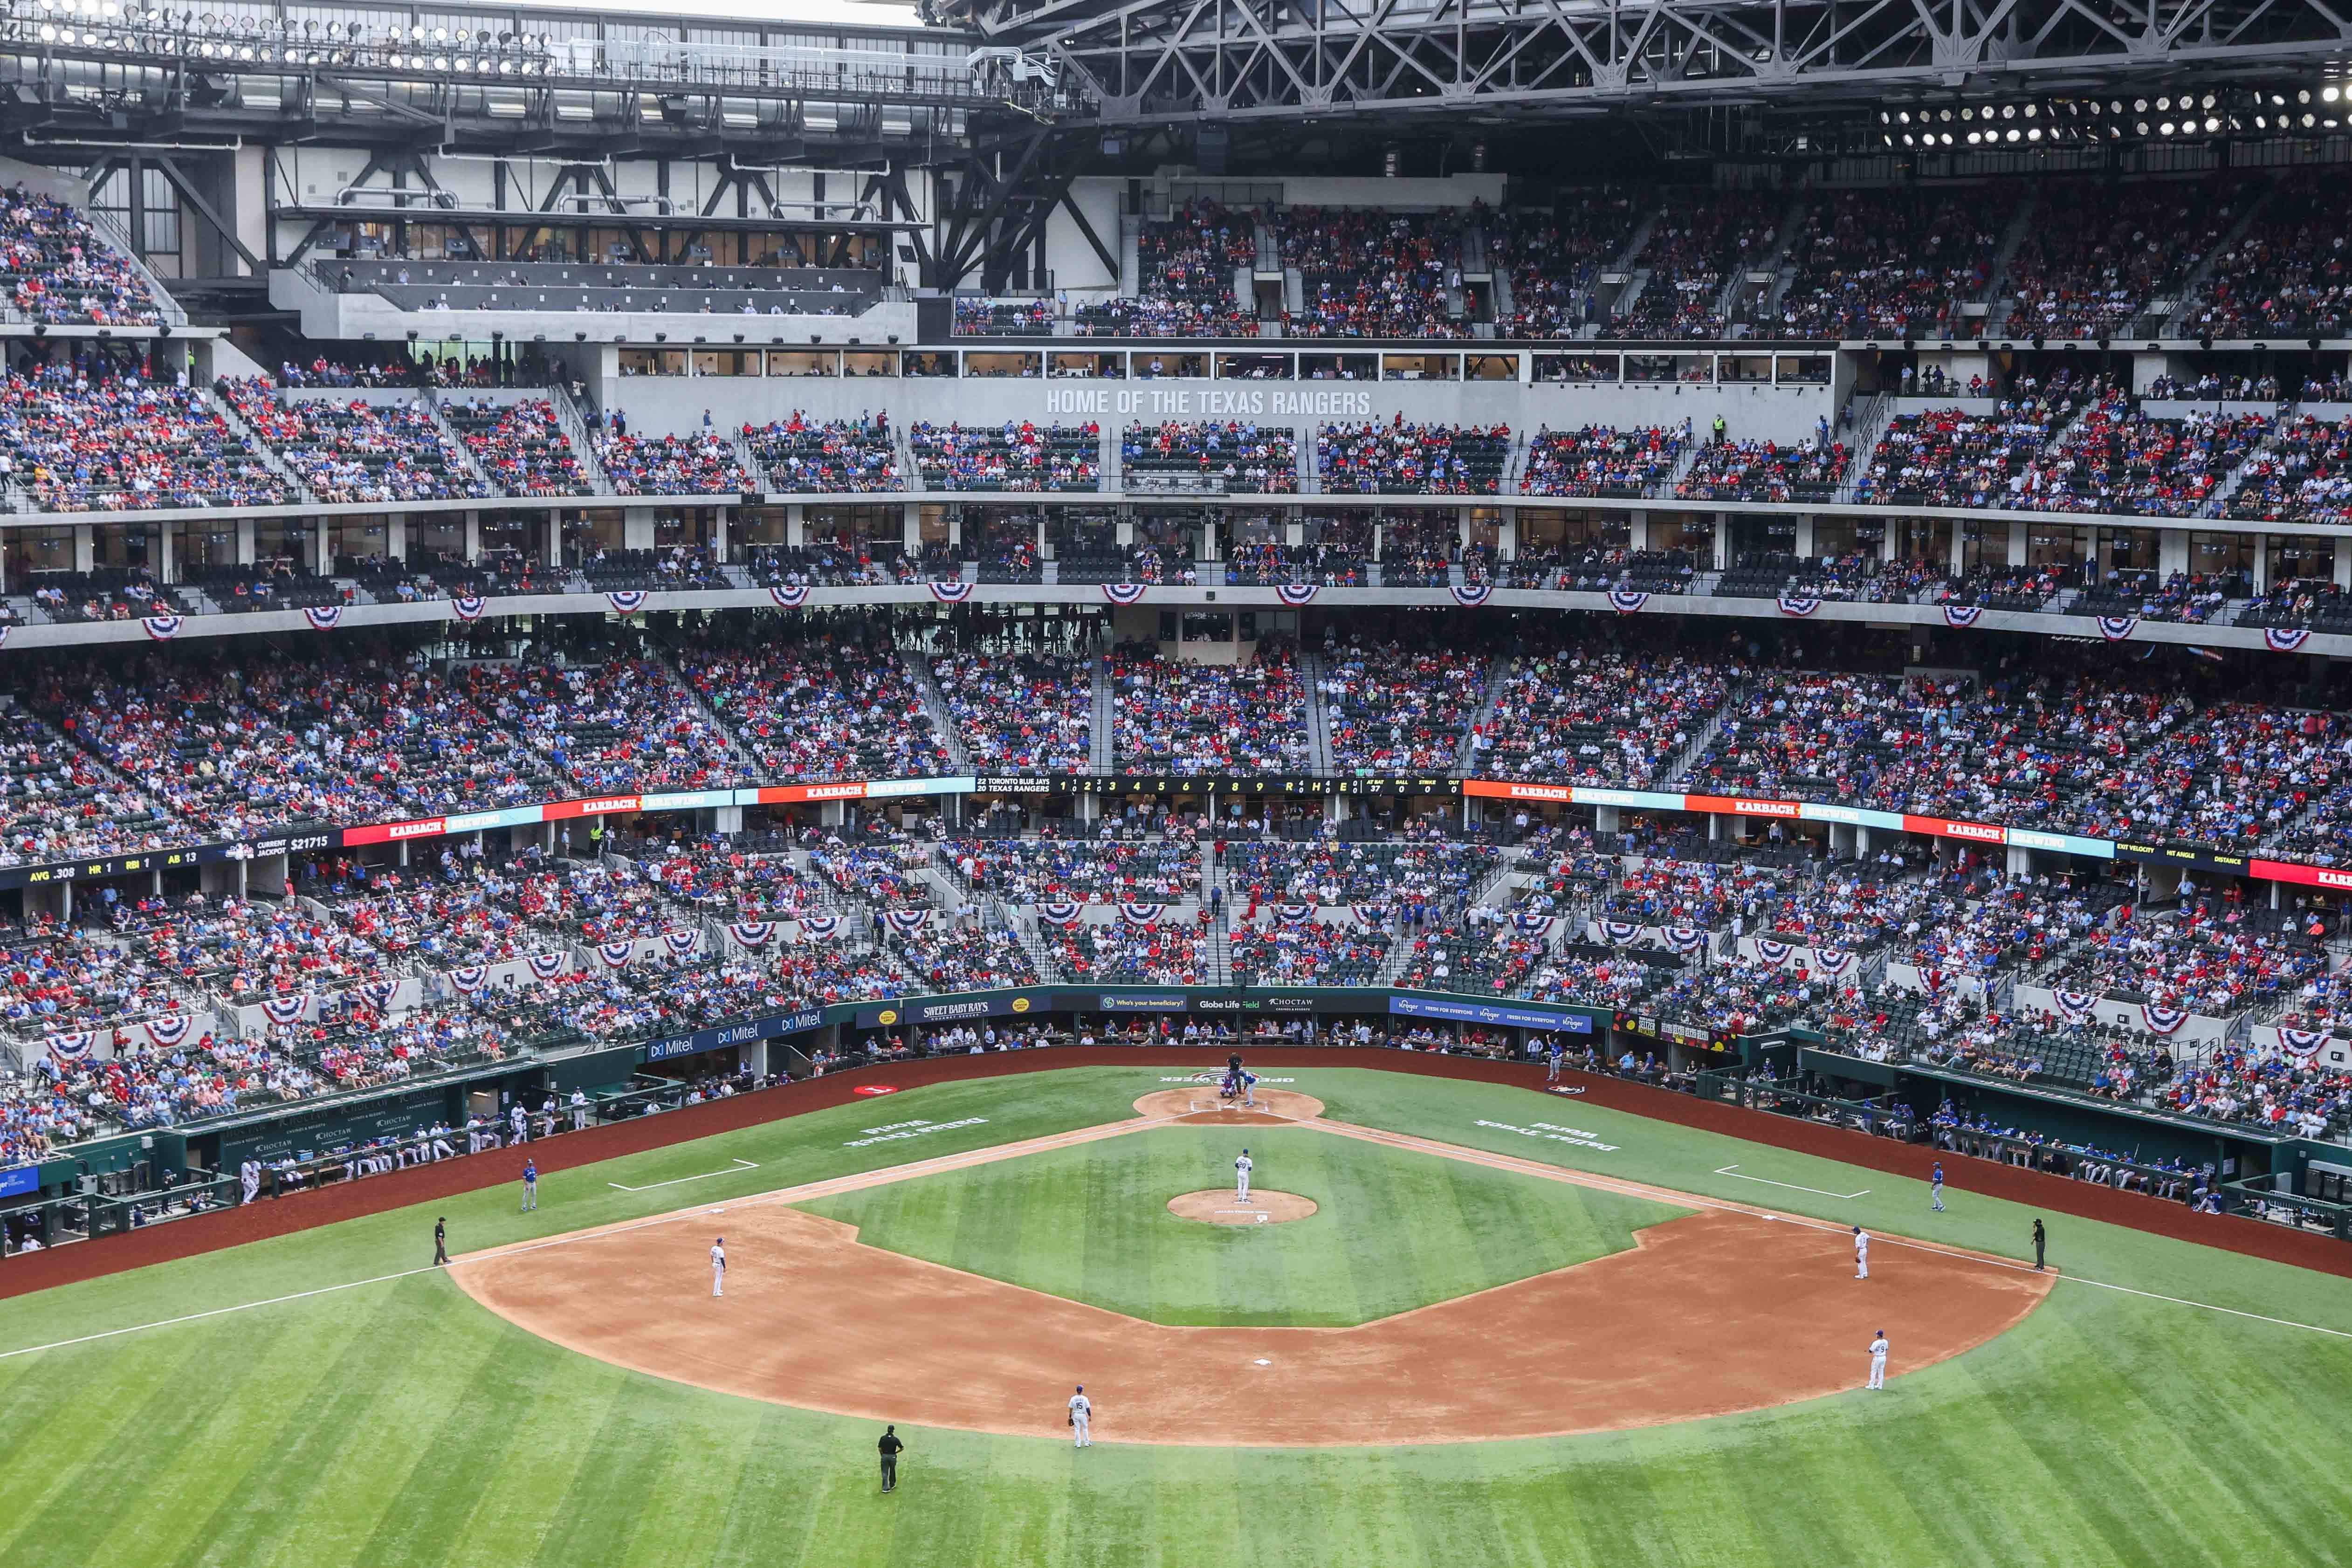 A view of Globe Life Field in the opening game of the season between the Texas Rangers and Toronto Blue Jays in Arlington on Monday. Photo: The Dallas Morning News/TNS